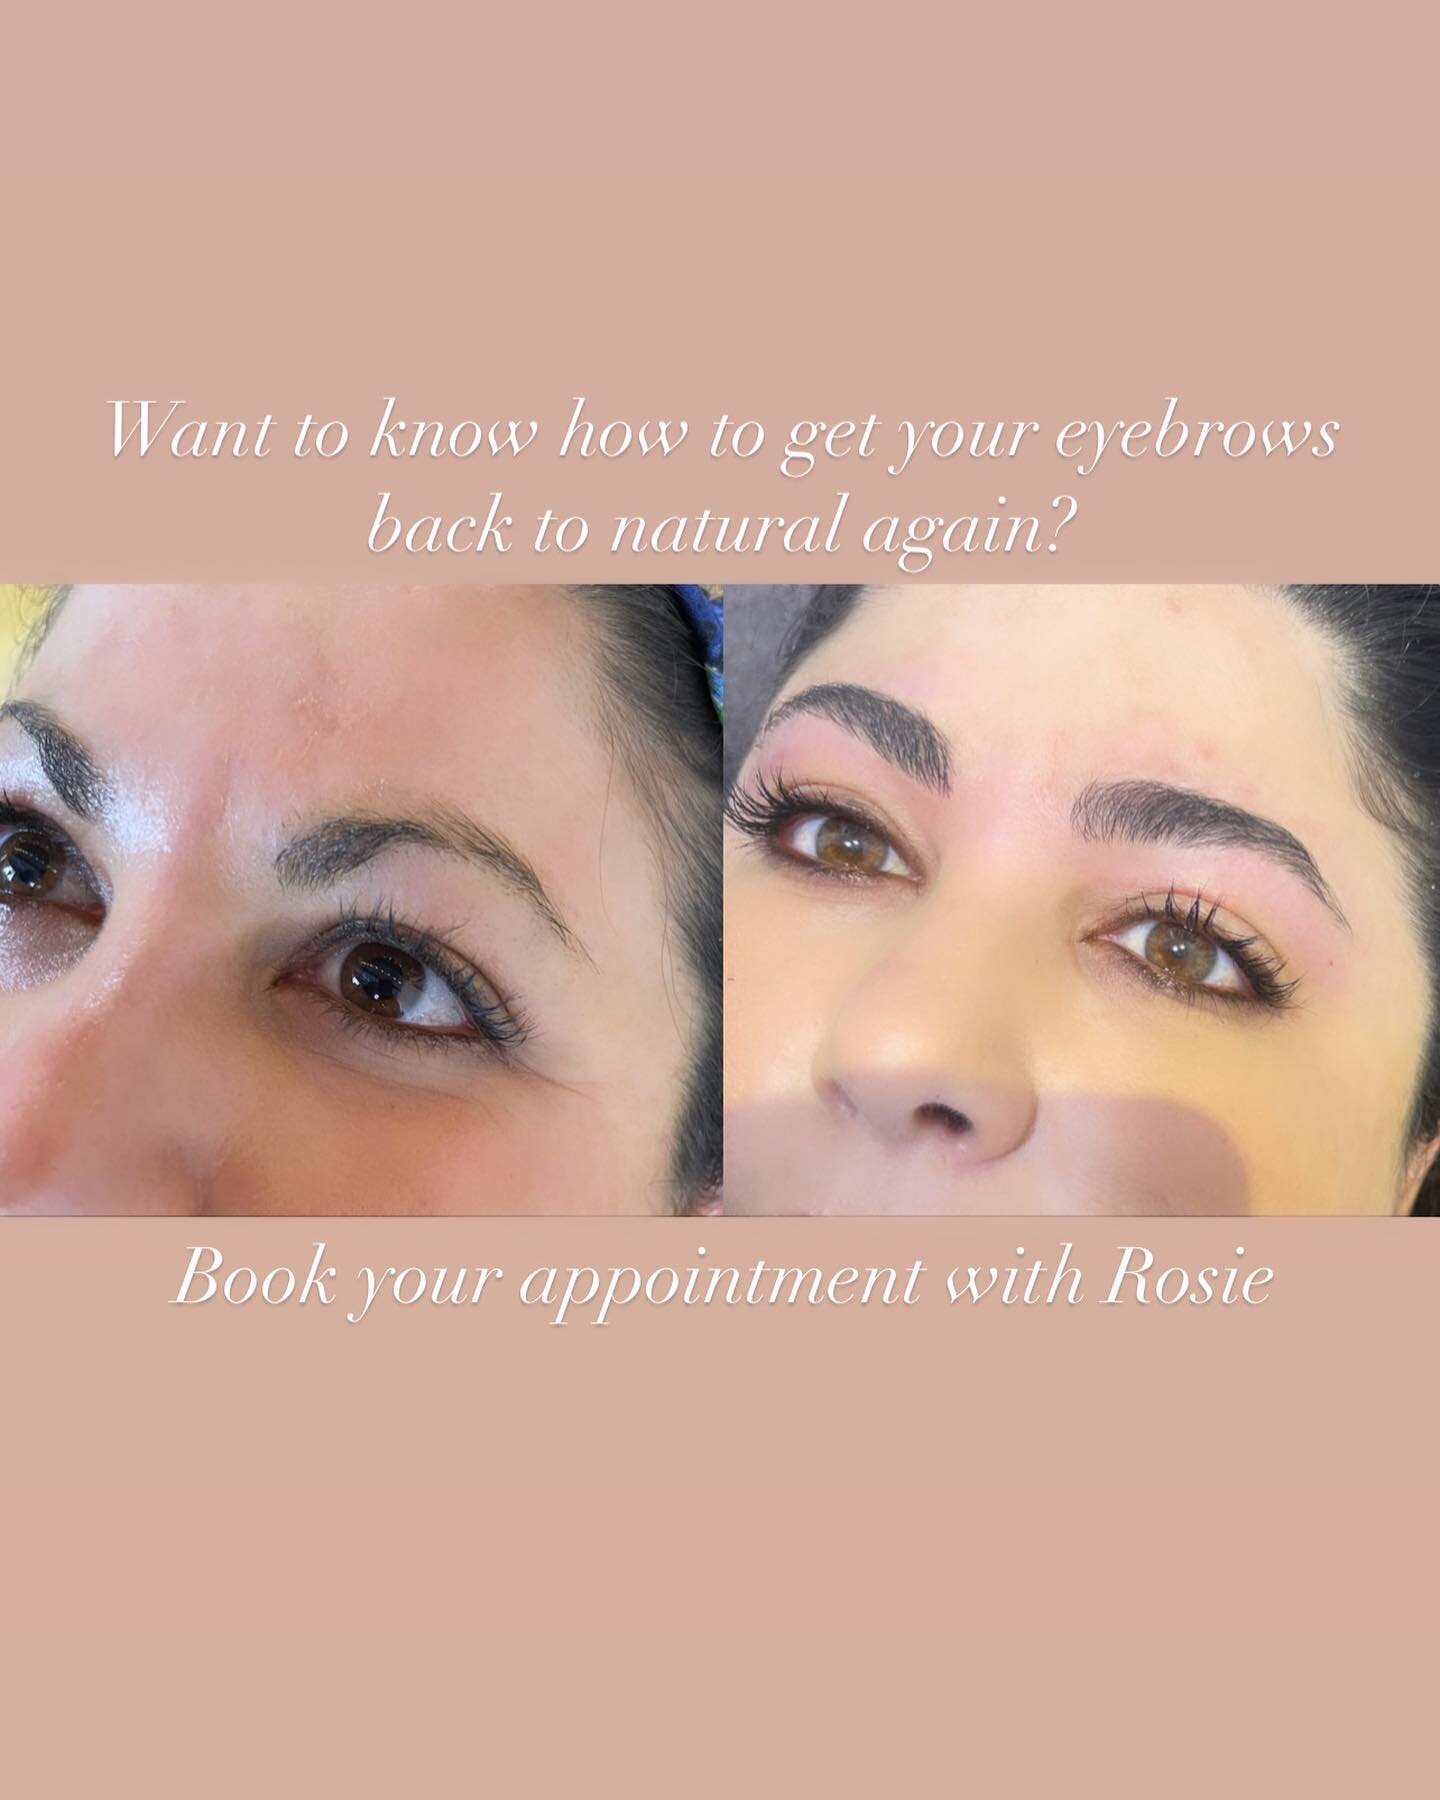 Get Your Eyebrows Growing Again &amp; Back To To Natural In No Time @rosiesbeauty 
Wondering how we get your eyebrows to grow back from thin to natural again?
BOOK NOW with Rosie 
#eyebrows #natural #browshaping #browexpert #browgoals #browartist #br